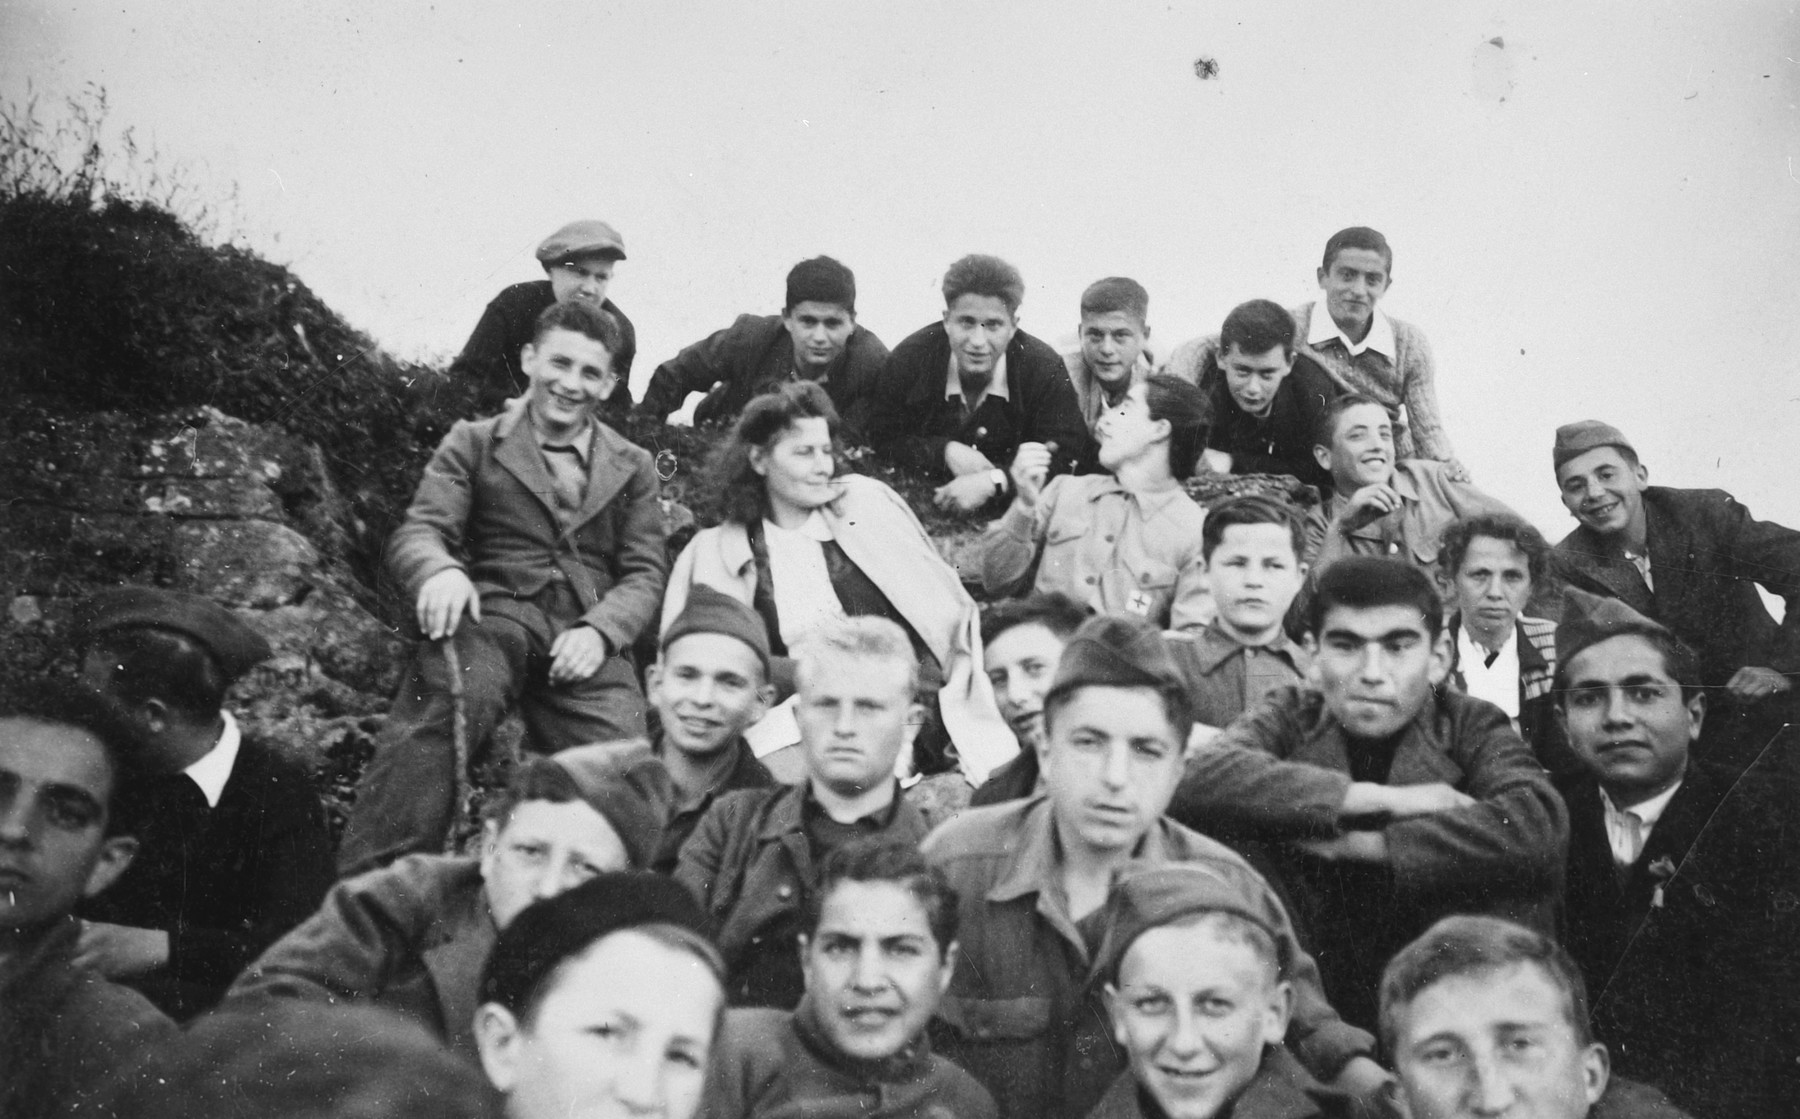 Group portrait of Jewish youth in a children's home in Switzerland.

Moniek Szmulewicz is among those pictured.  Monek (Murry) Goldfinger is on the far right, second from the top.